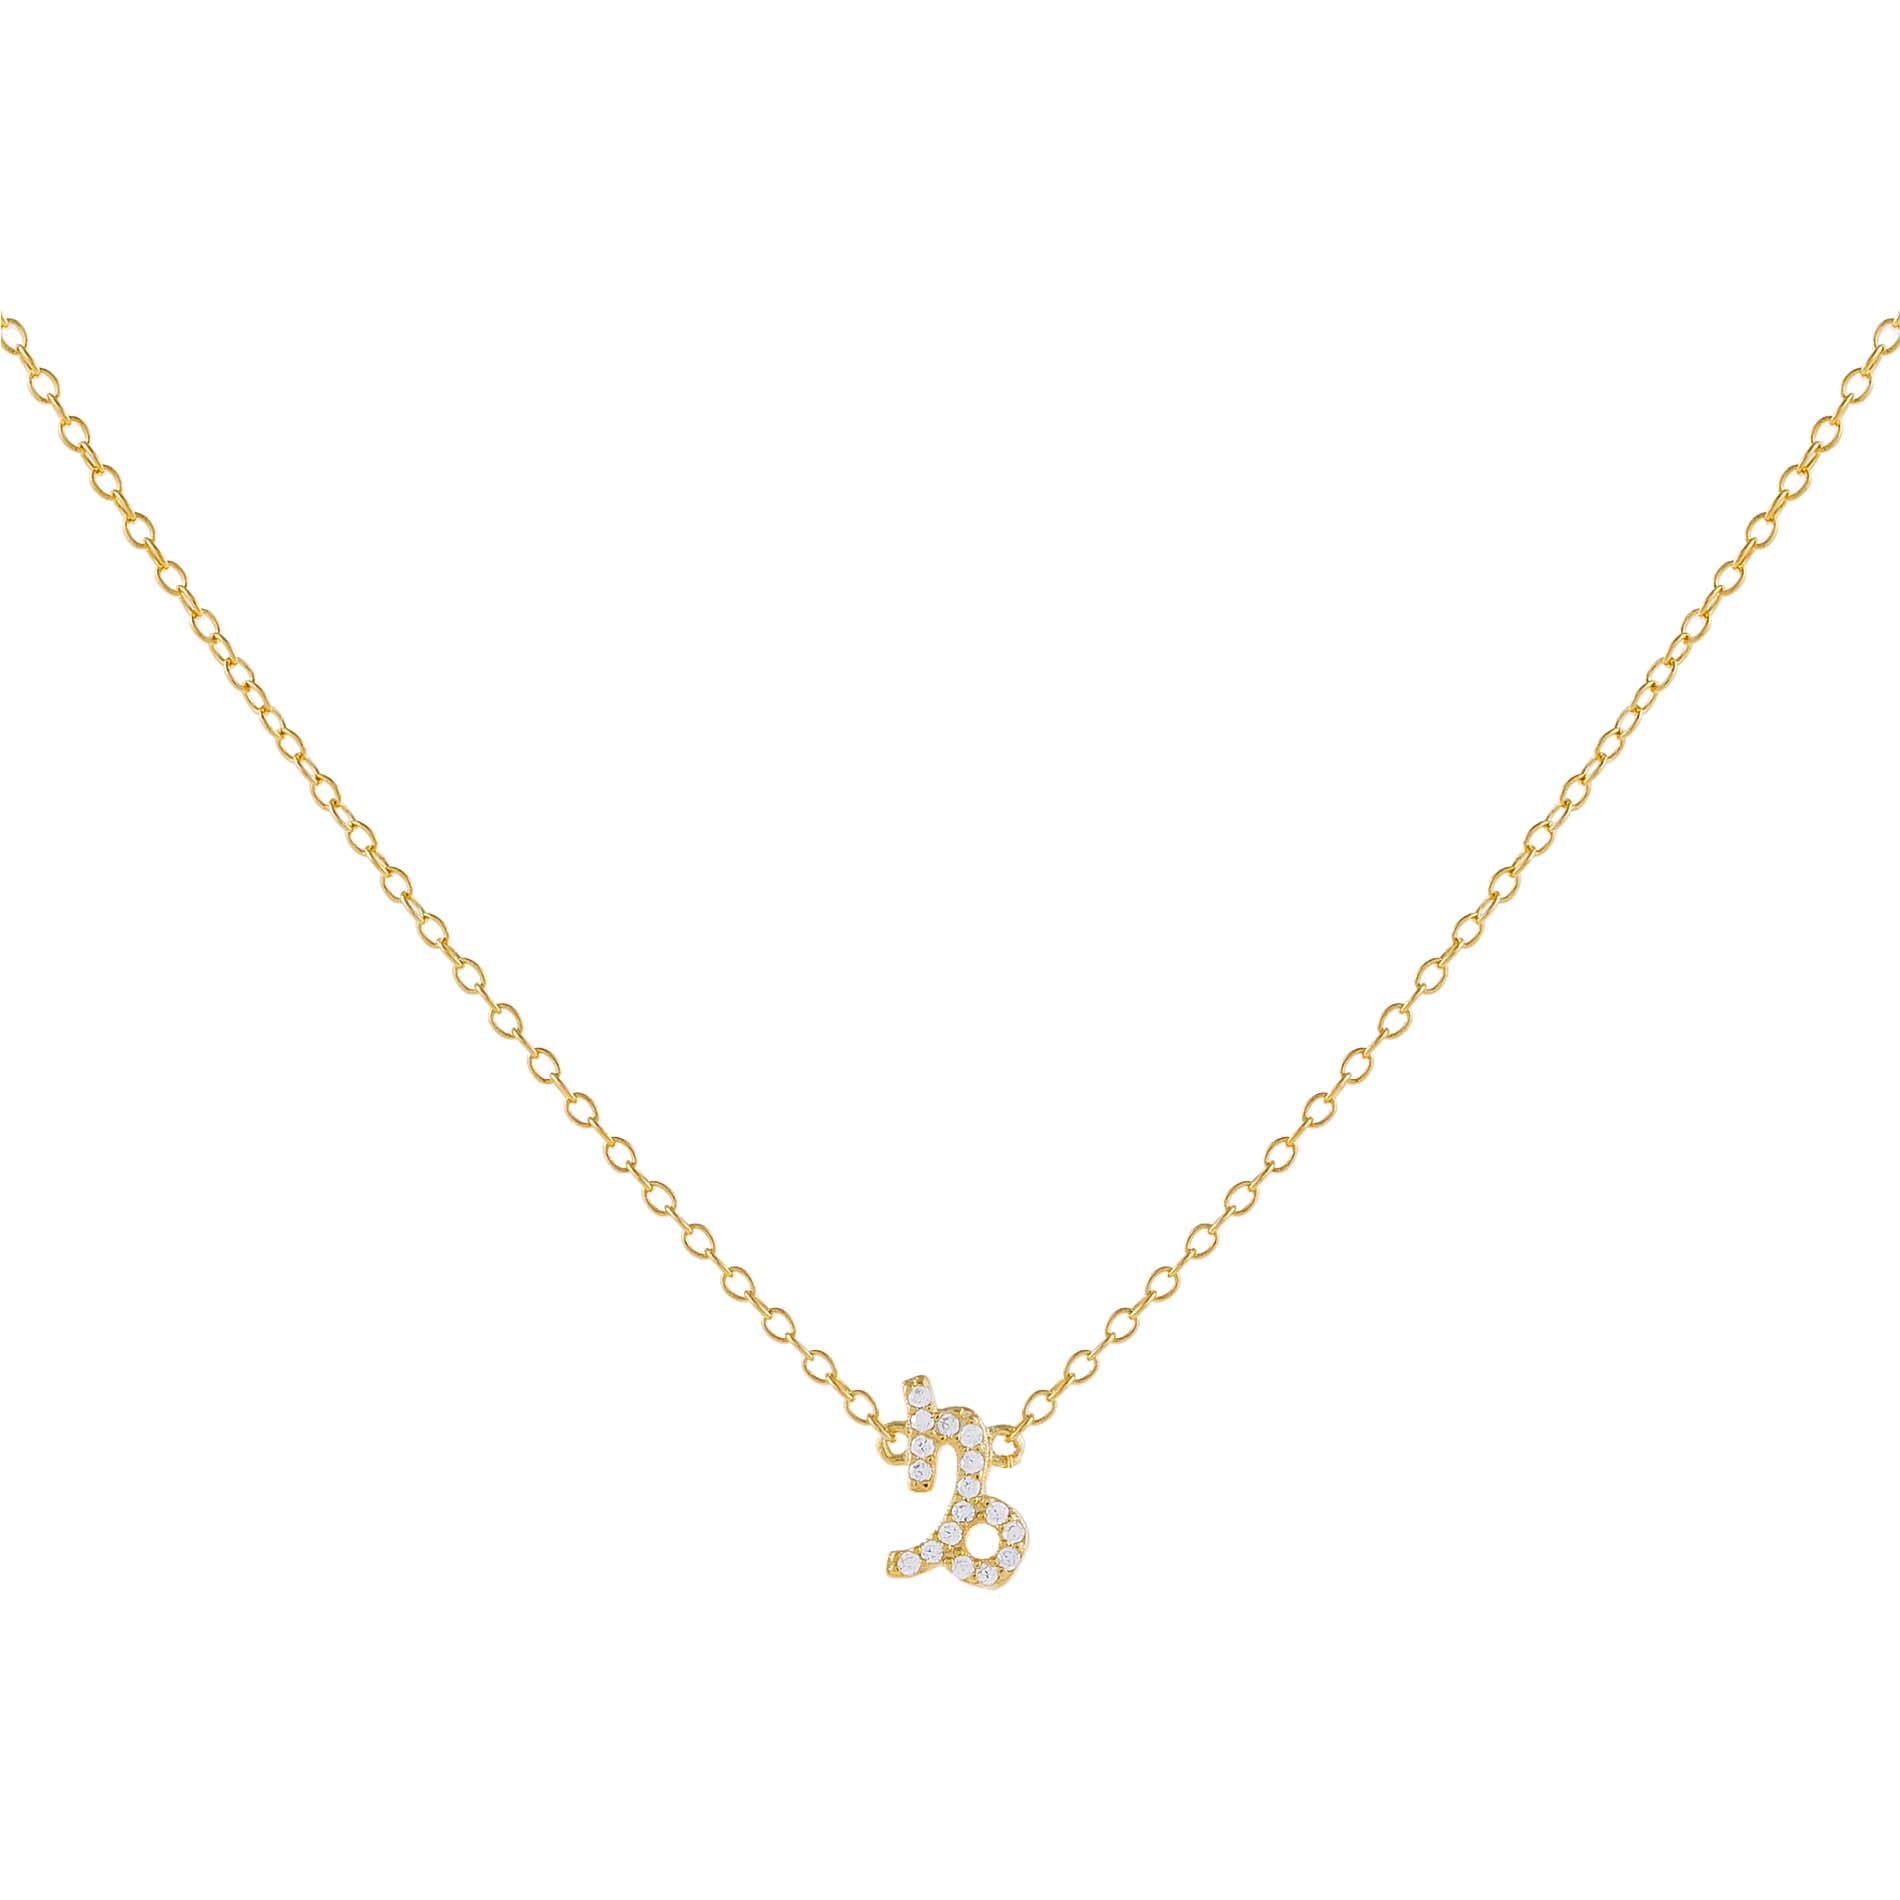 Hayopi Dainty Gold Initial Necklace for Women Girls,14K Gold